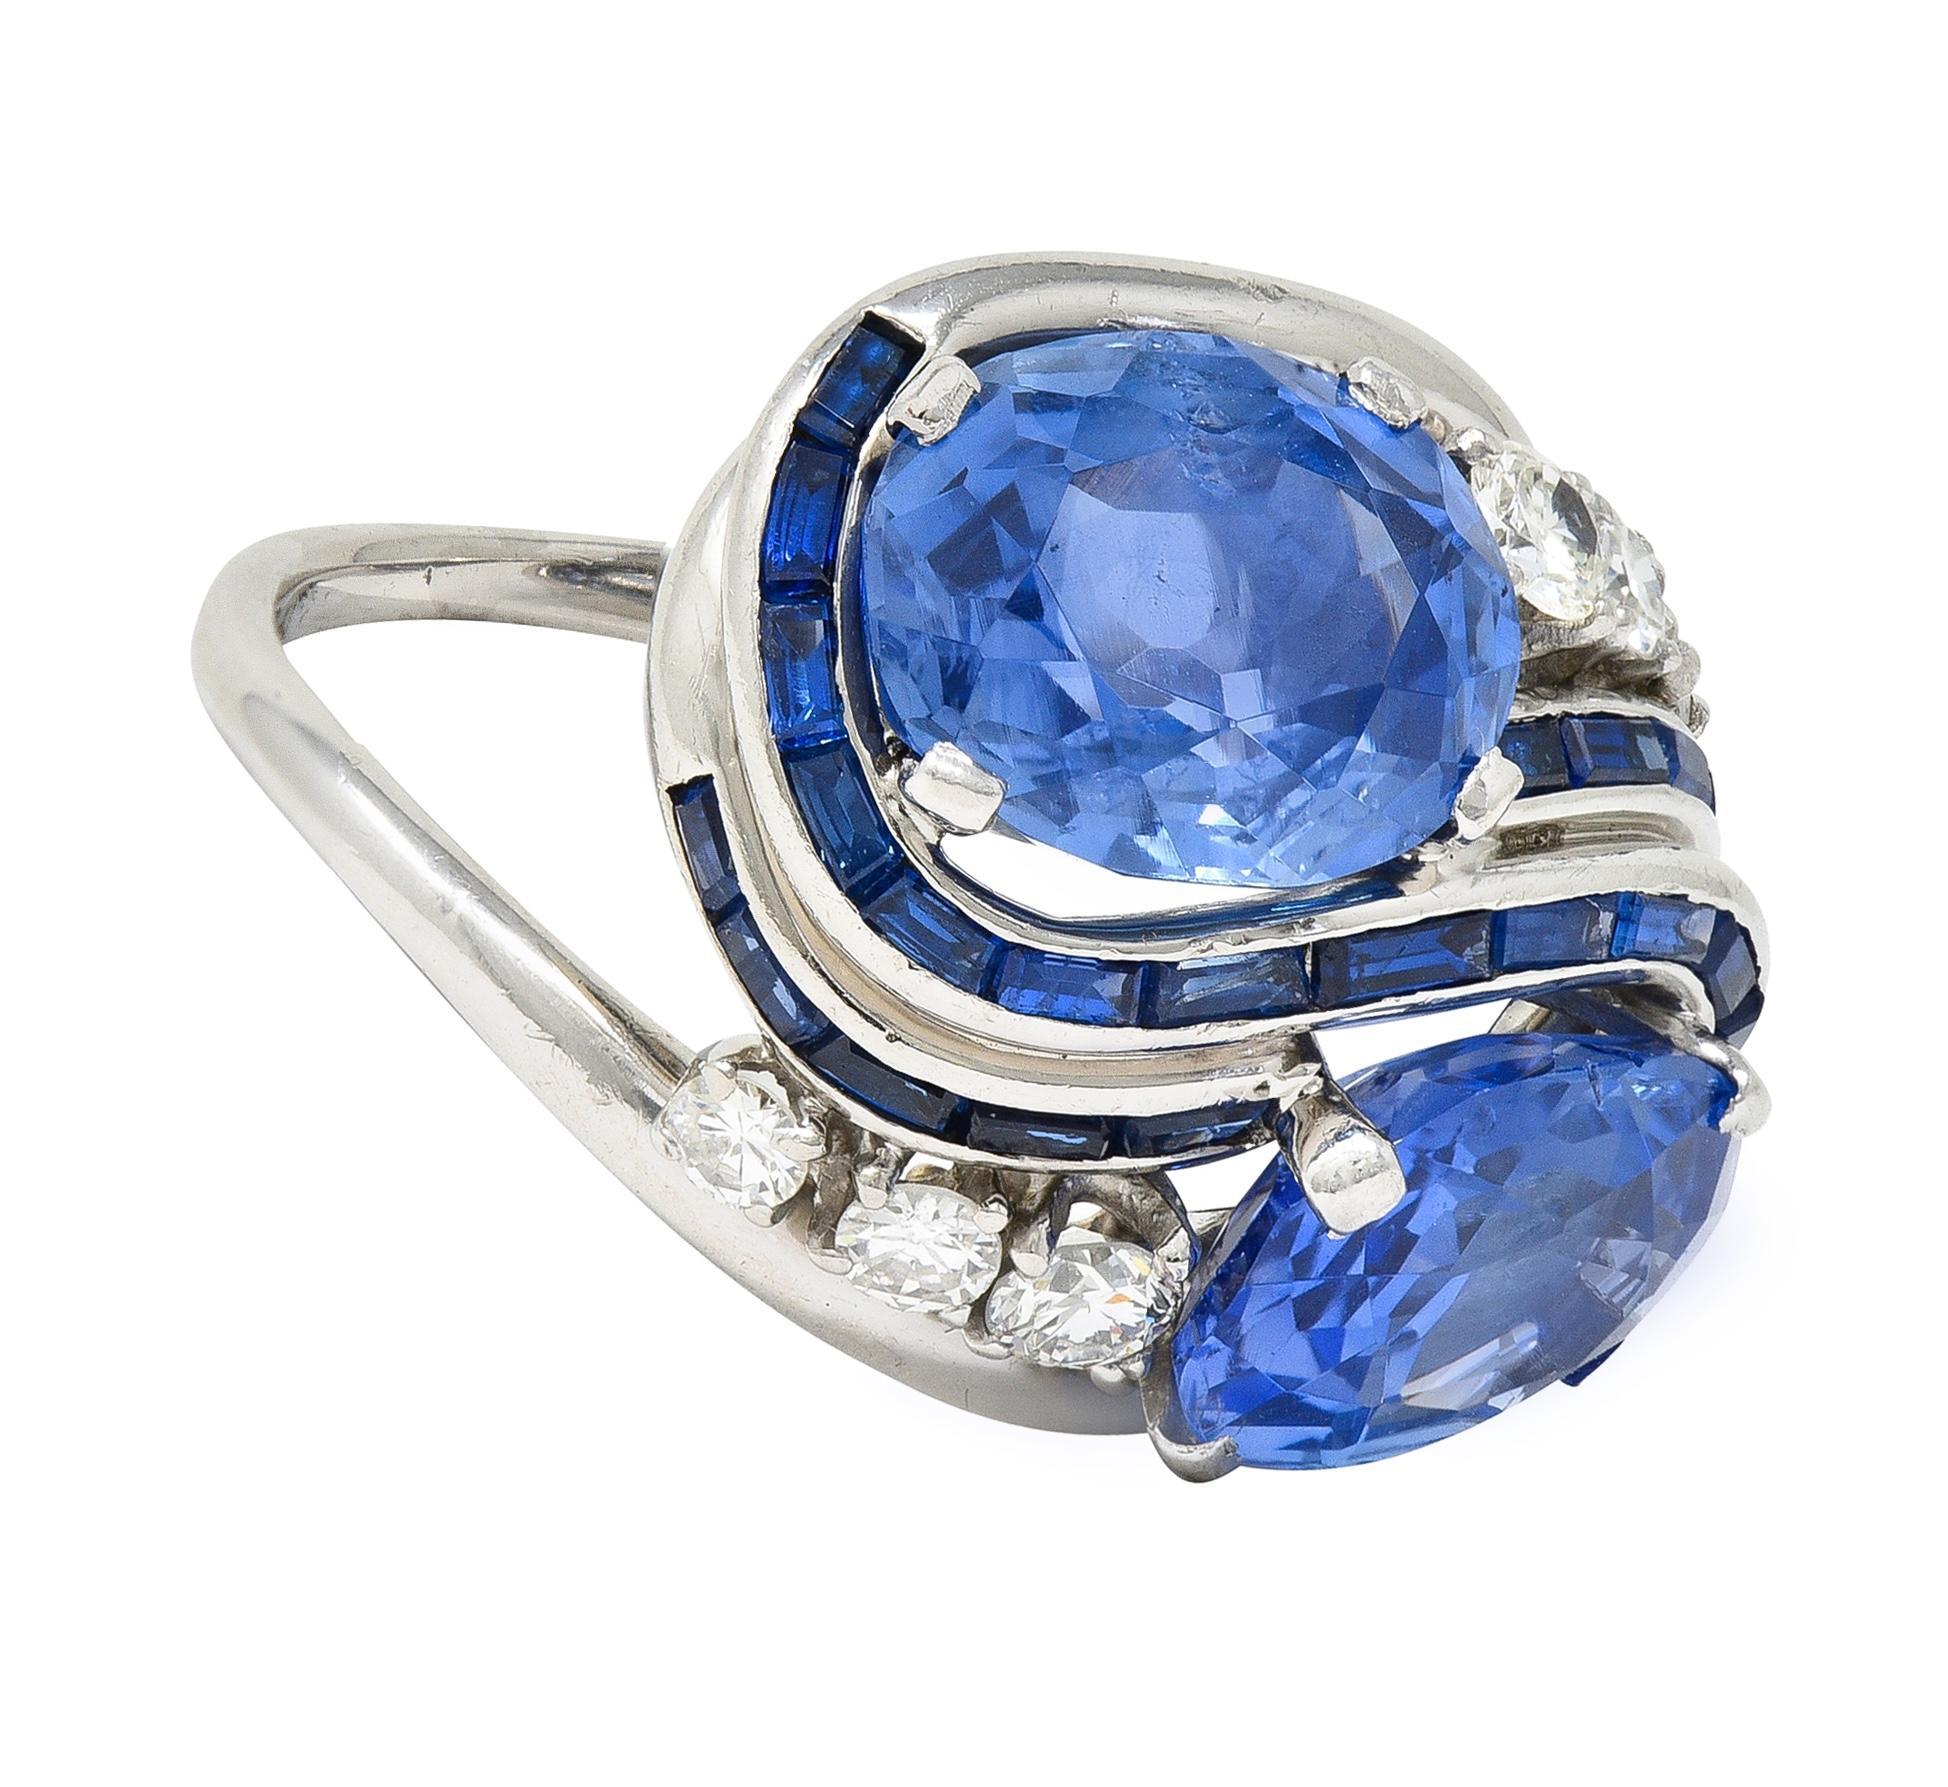 Featuring two oval-shaped mixed-cut sapphires weighing approximately 9.45 carats total - transparent medium blue 
Natural Sri Lankan in origin with no indications of heat treatments - prong set east to west and juxtaposed
Featuring swirling rows of